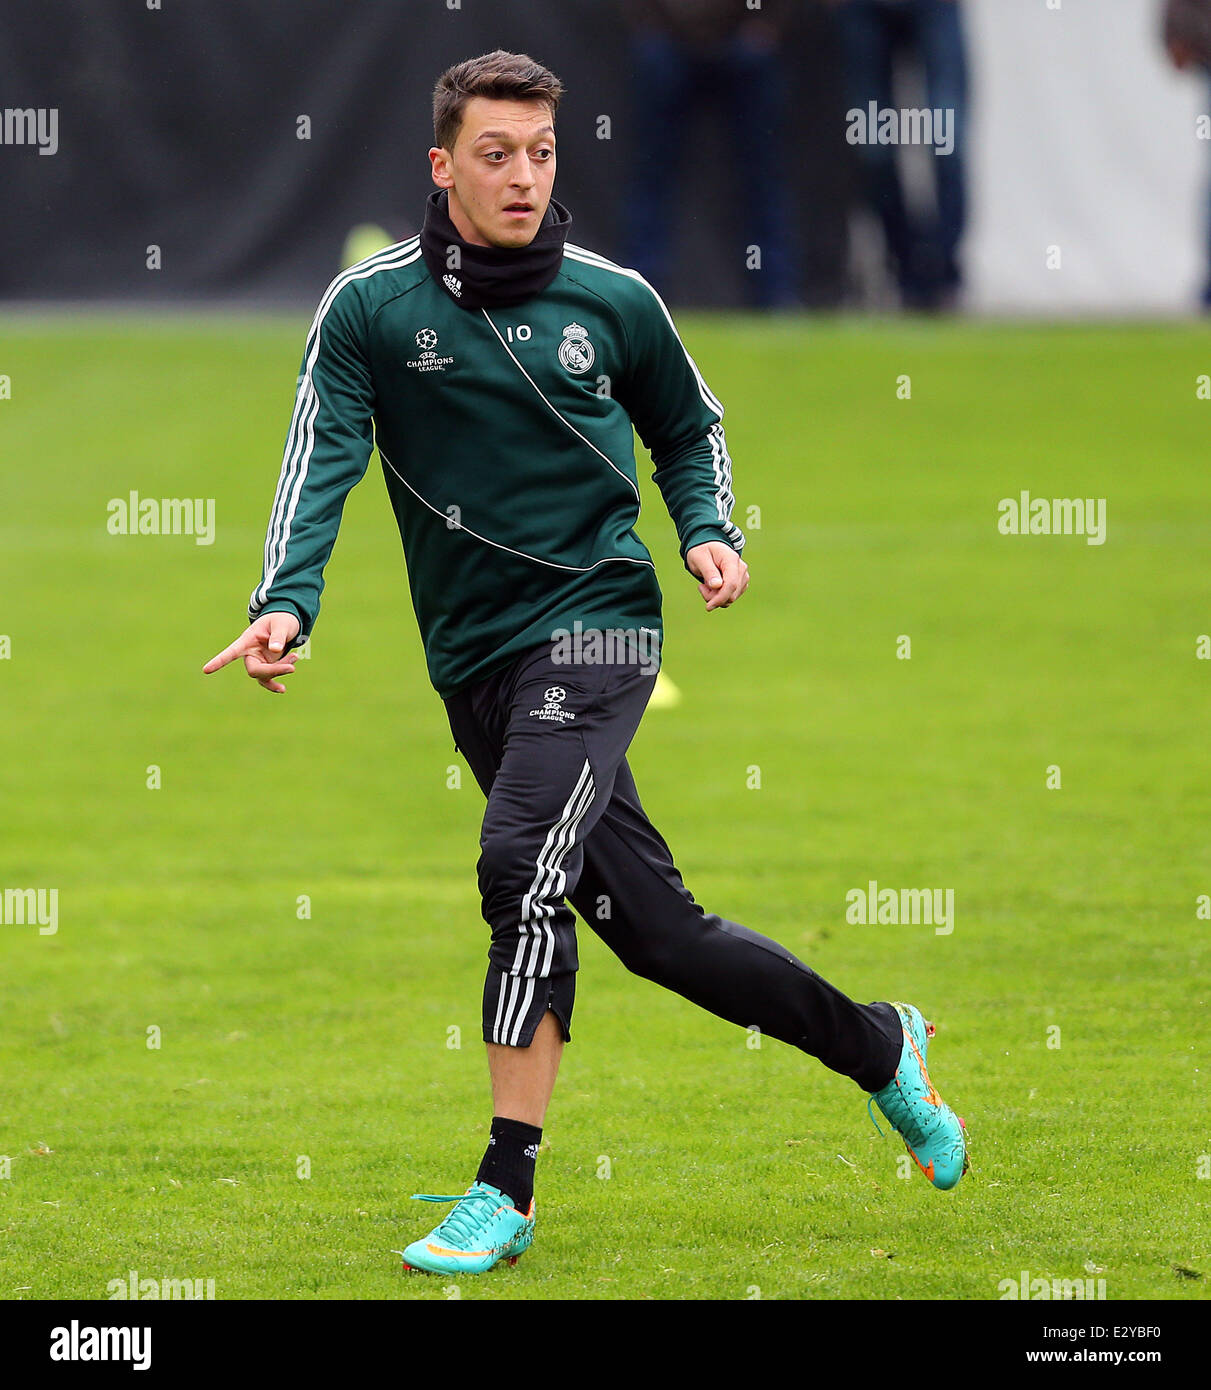 Real Madrid Football players training at Inonu Stadium in Istanbul ahead of their Champions league match against Galatasaray  Featuring: Mesut Ozil Where: Istanbul, Turkey When: 08 Apr 2013  **** Stock Photo